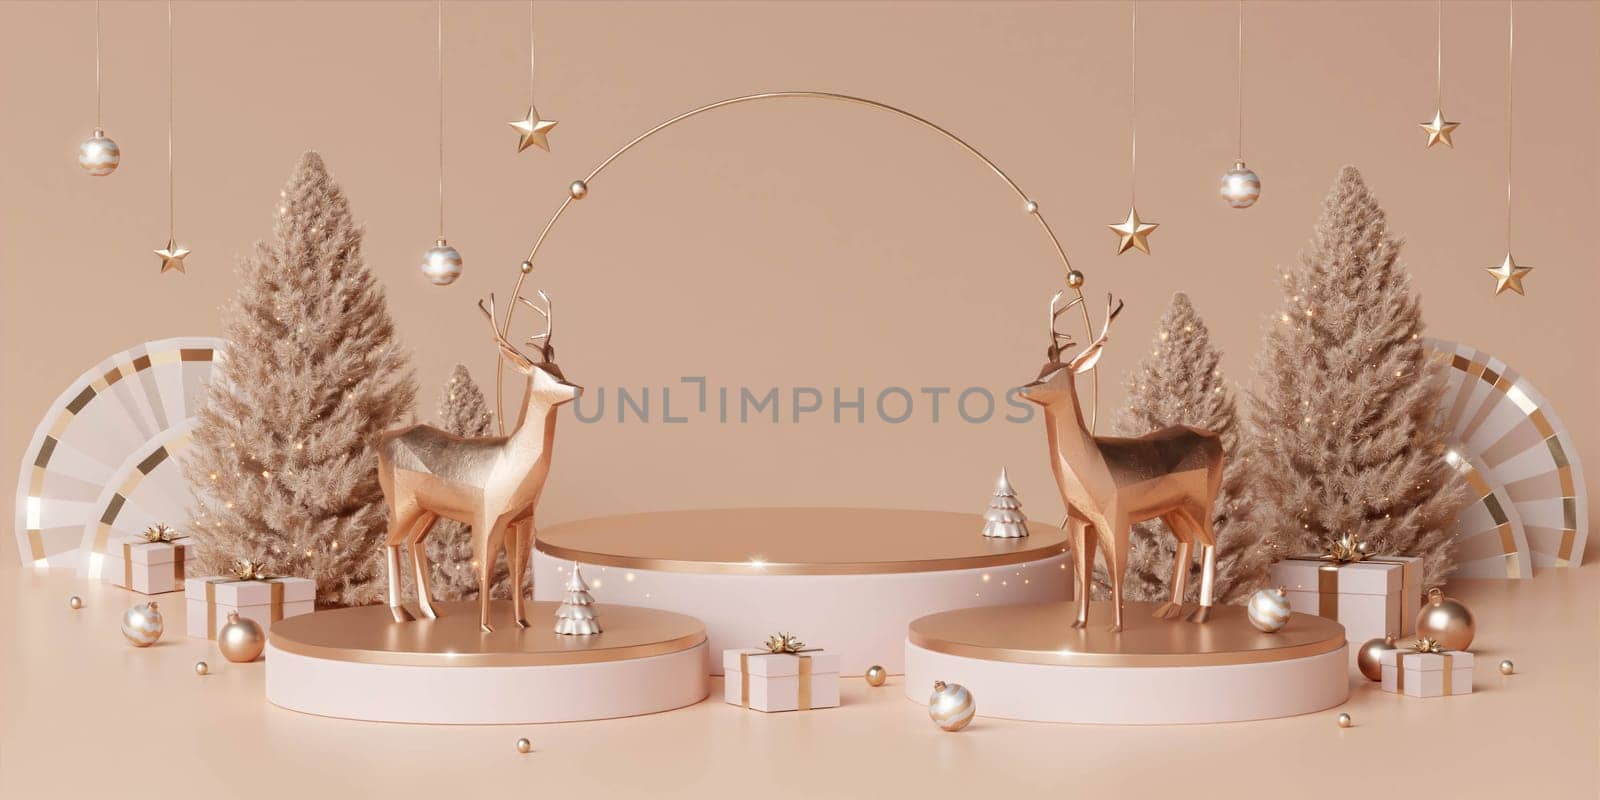 3d Christmas podium template design. Merry Christmas text with gold deer and pine tree elements for xmas mock up presentation background..